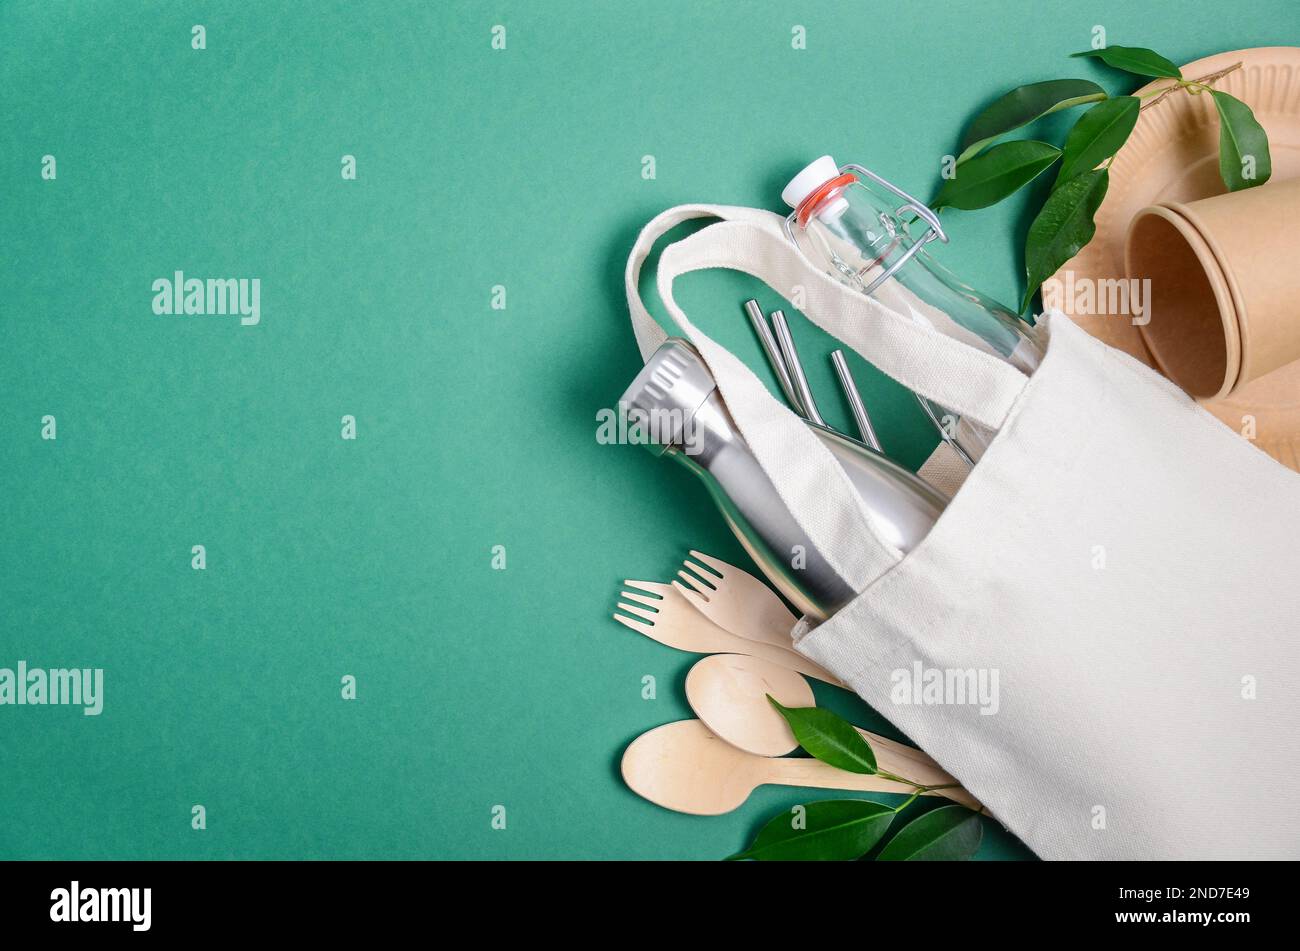 Eco friendly shopping bag with cutlery. Zero waste concept. Plastic free concept. Top view, flat lay, copy space. Stock Photo